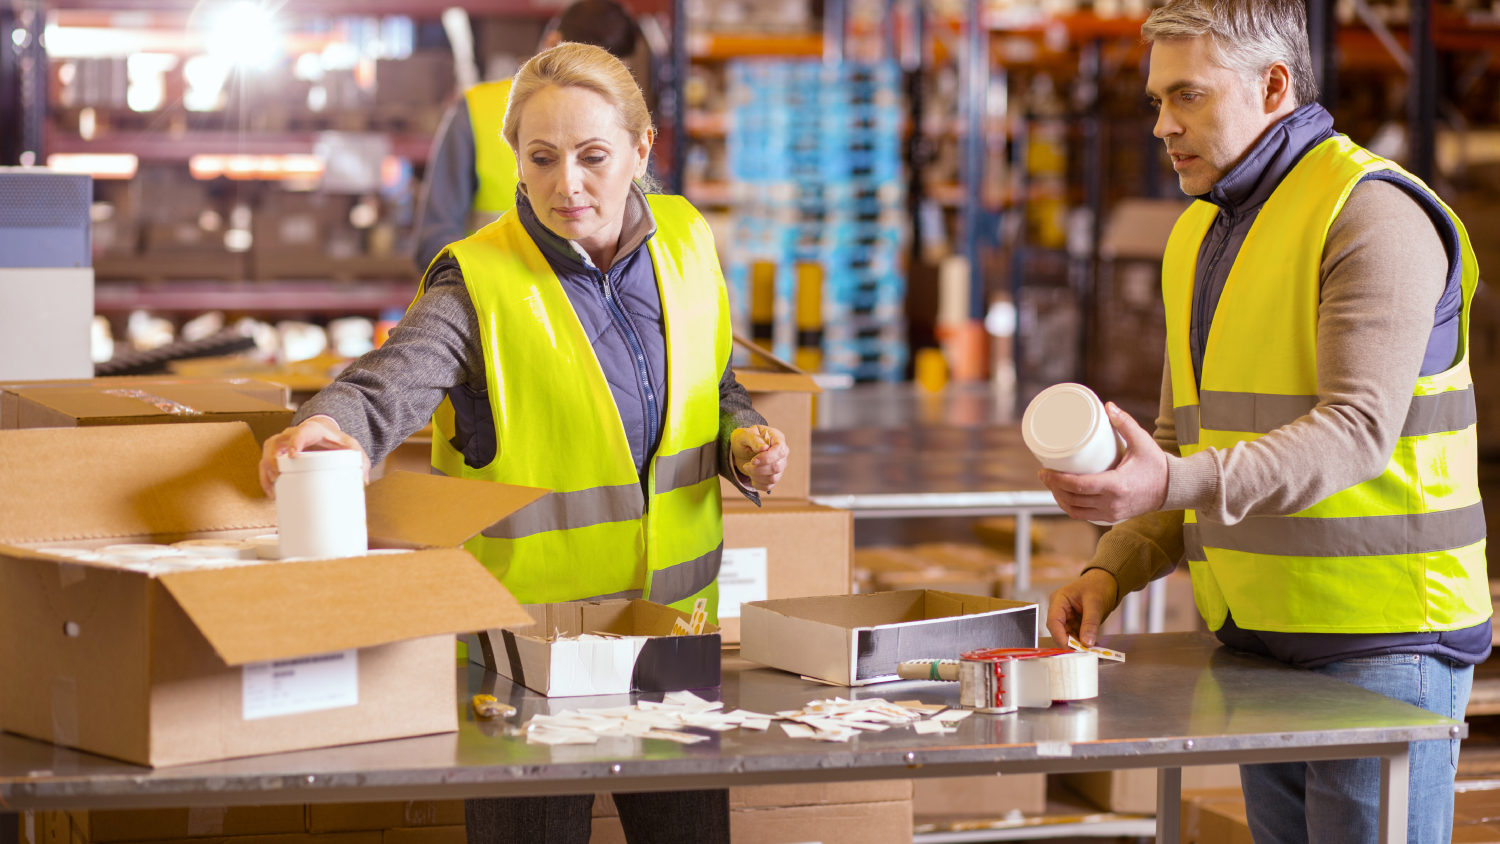 Additional Services for E-shops - Handling complaints and returns - checking and repackaging returned or claimed goods in a warehouse environment